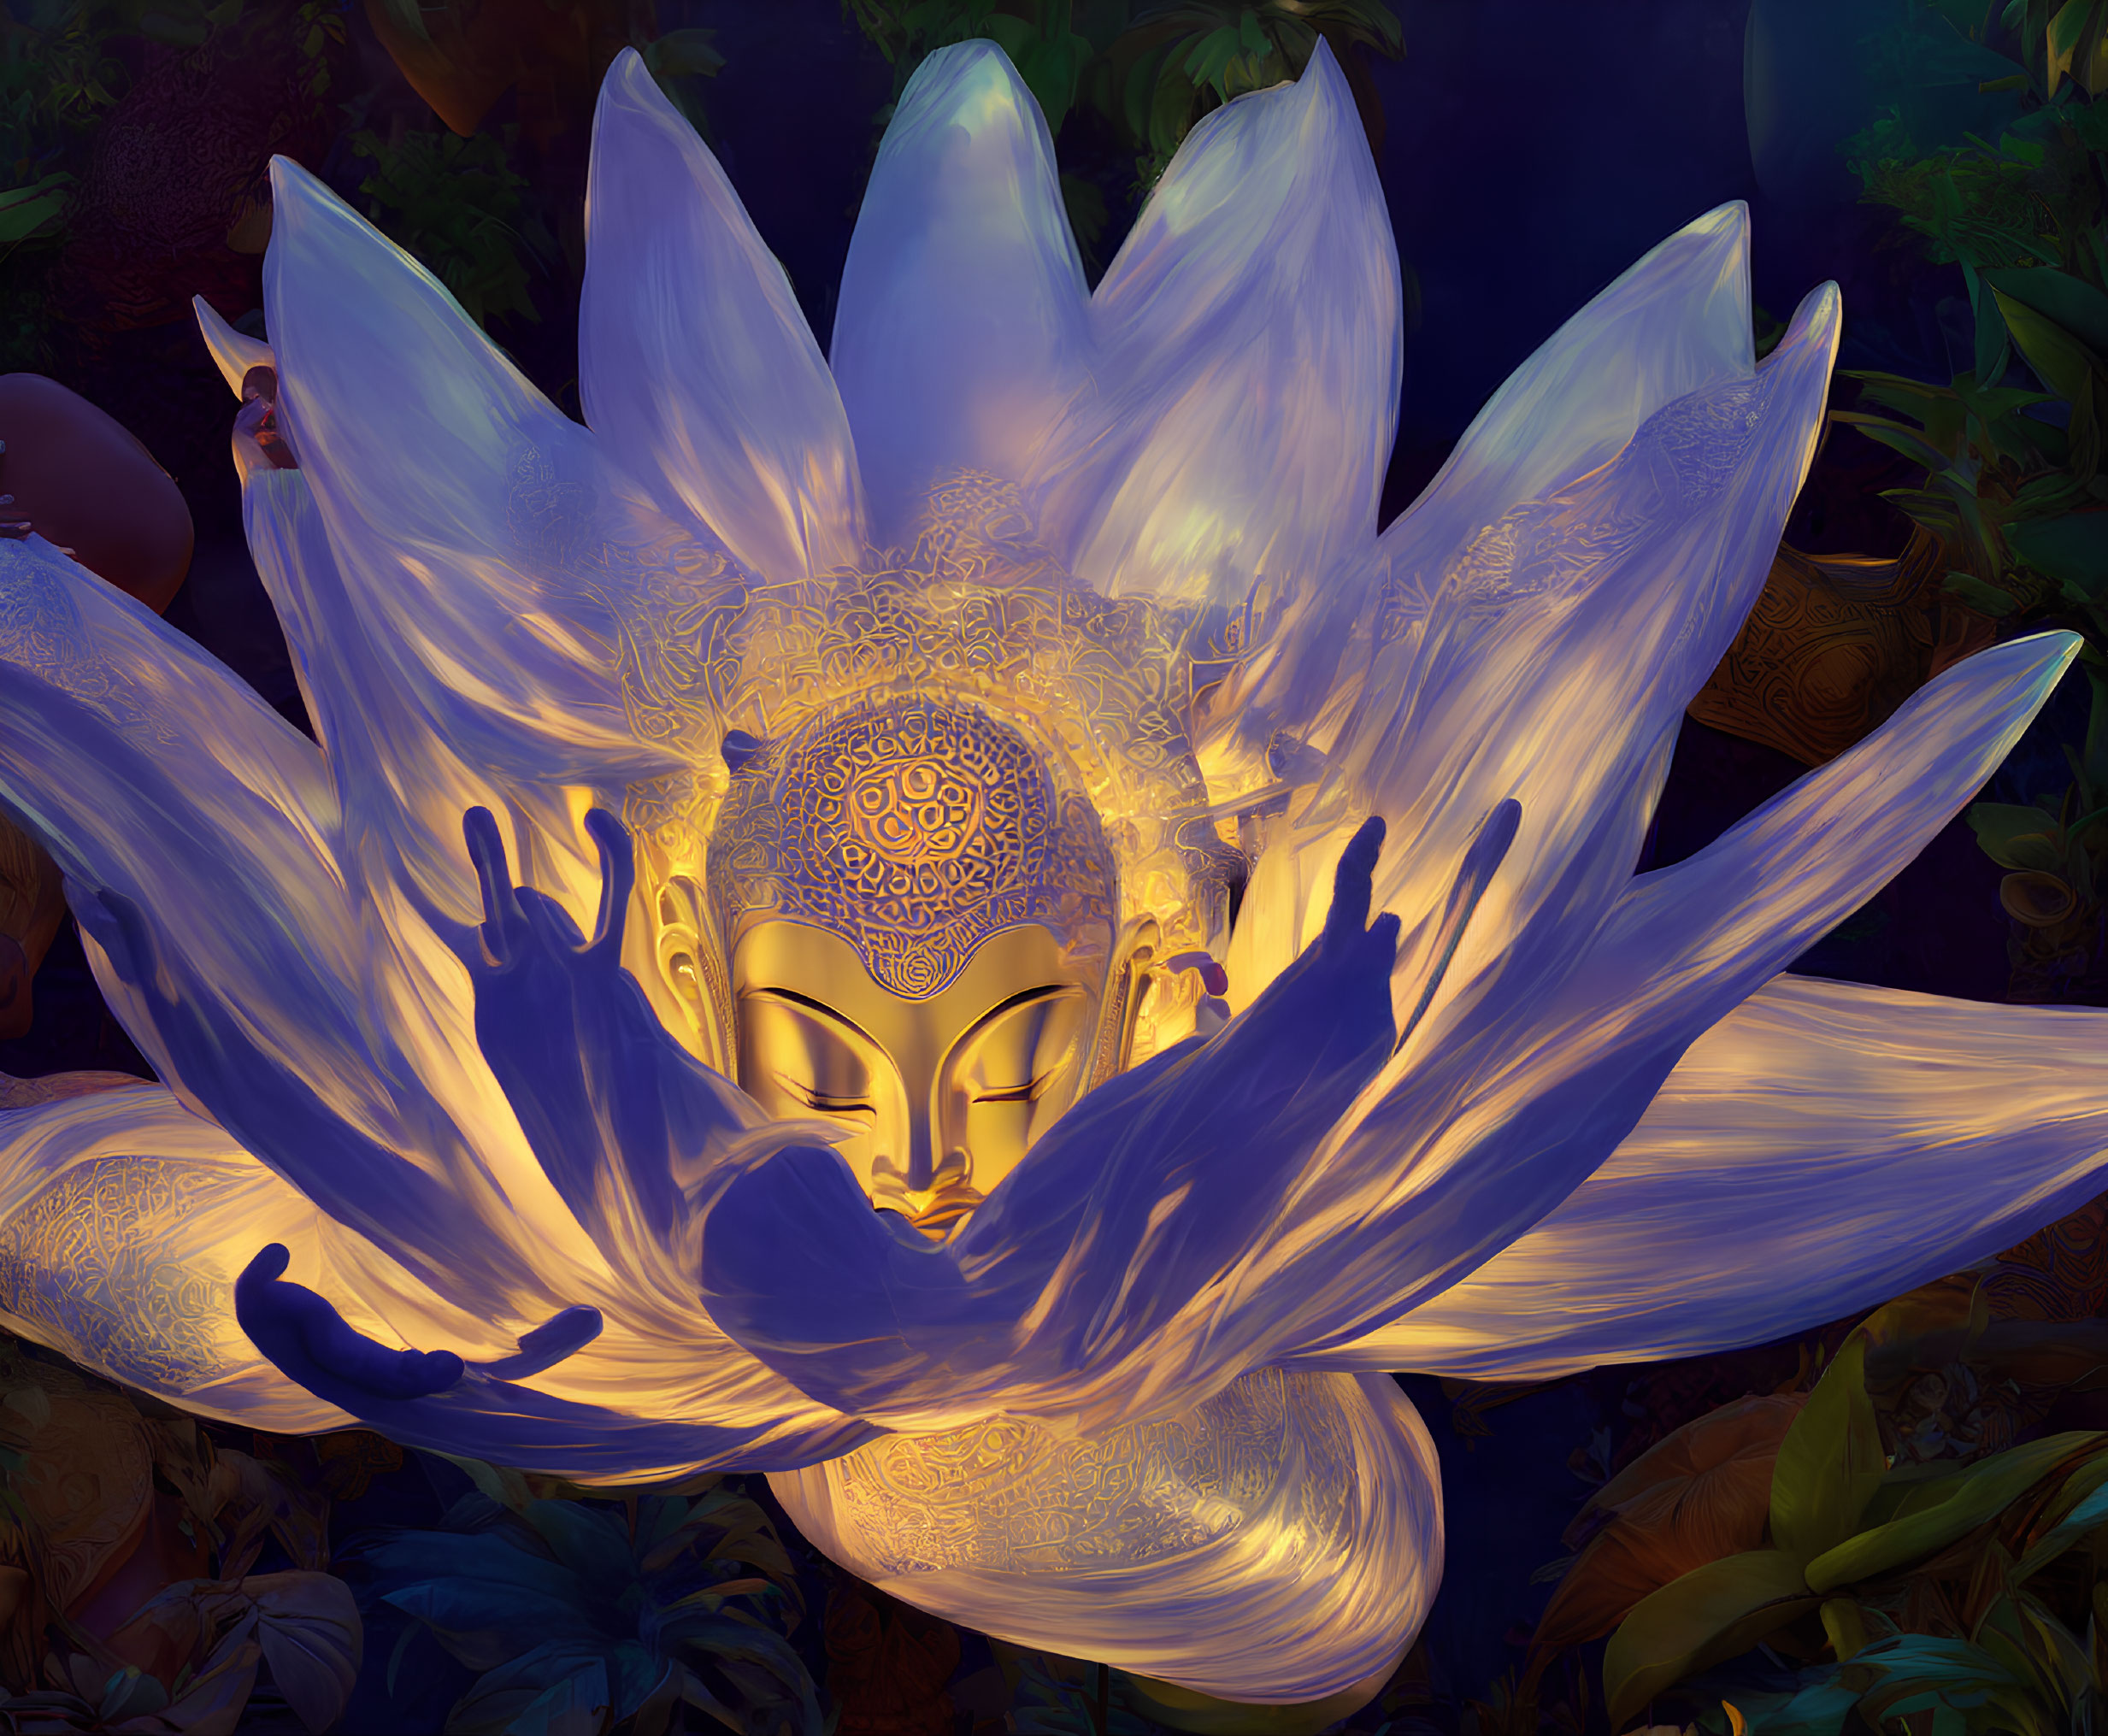 Buddha figure in lotus surrounded by lush foliage at night